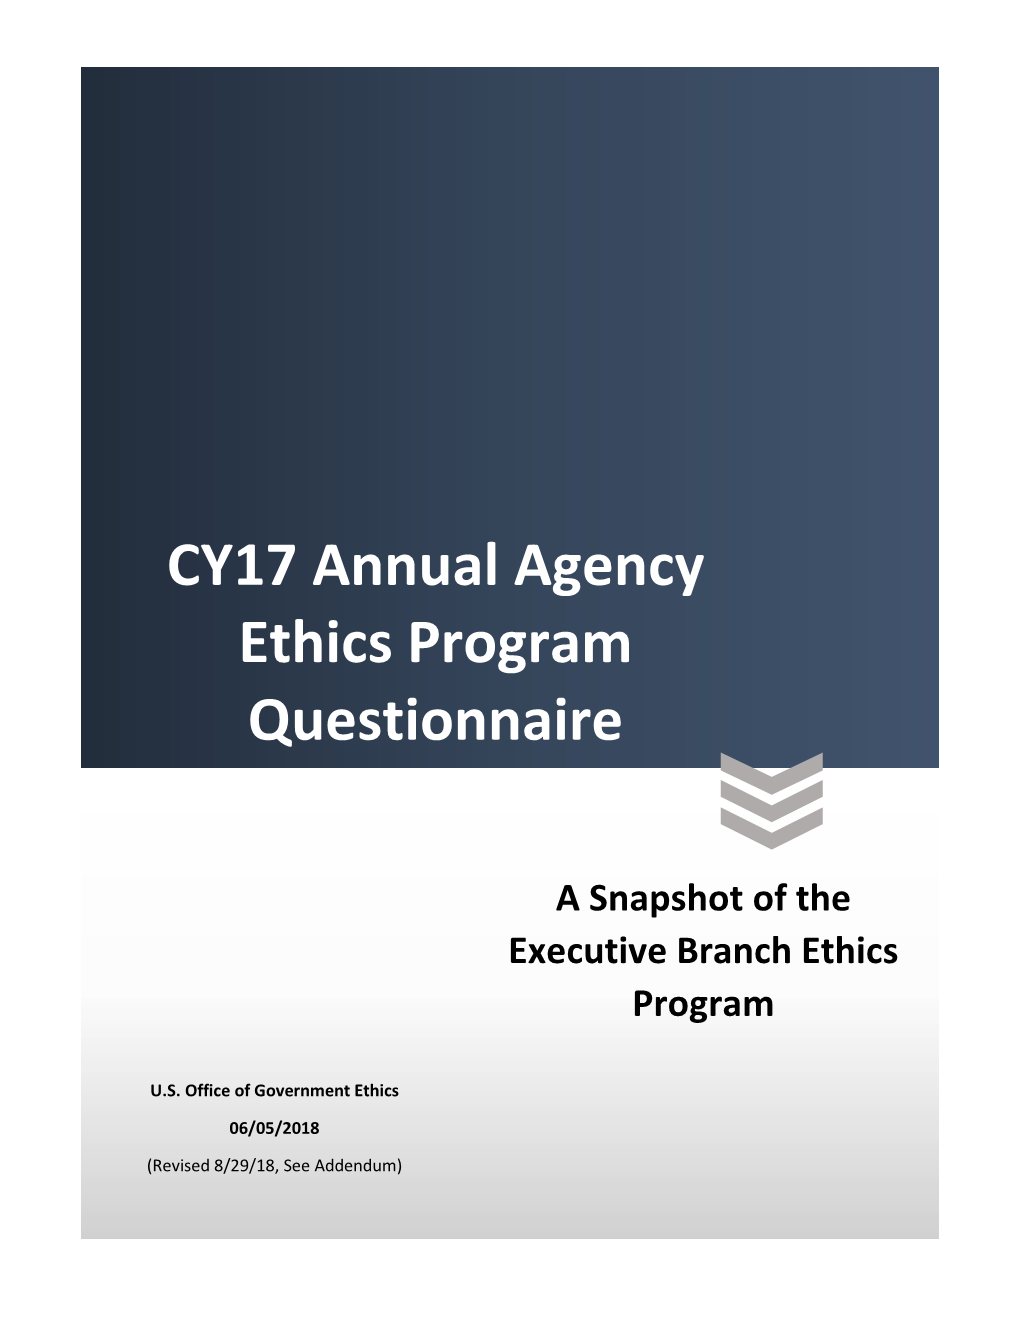 CY17 Annual Agency Ethics Program Questionnaire